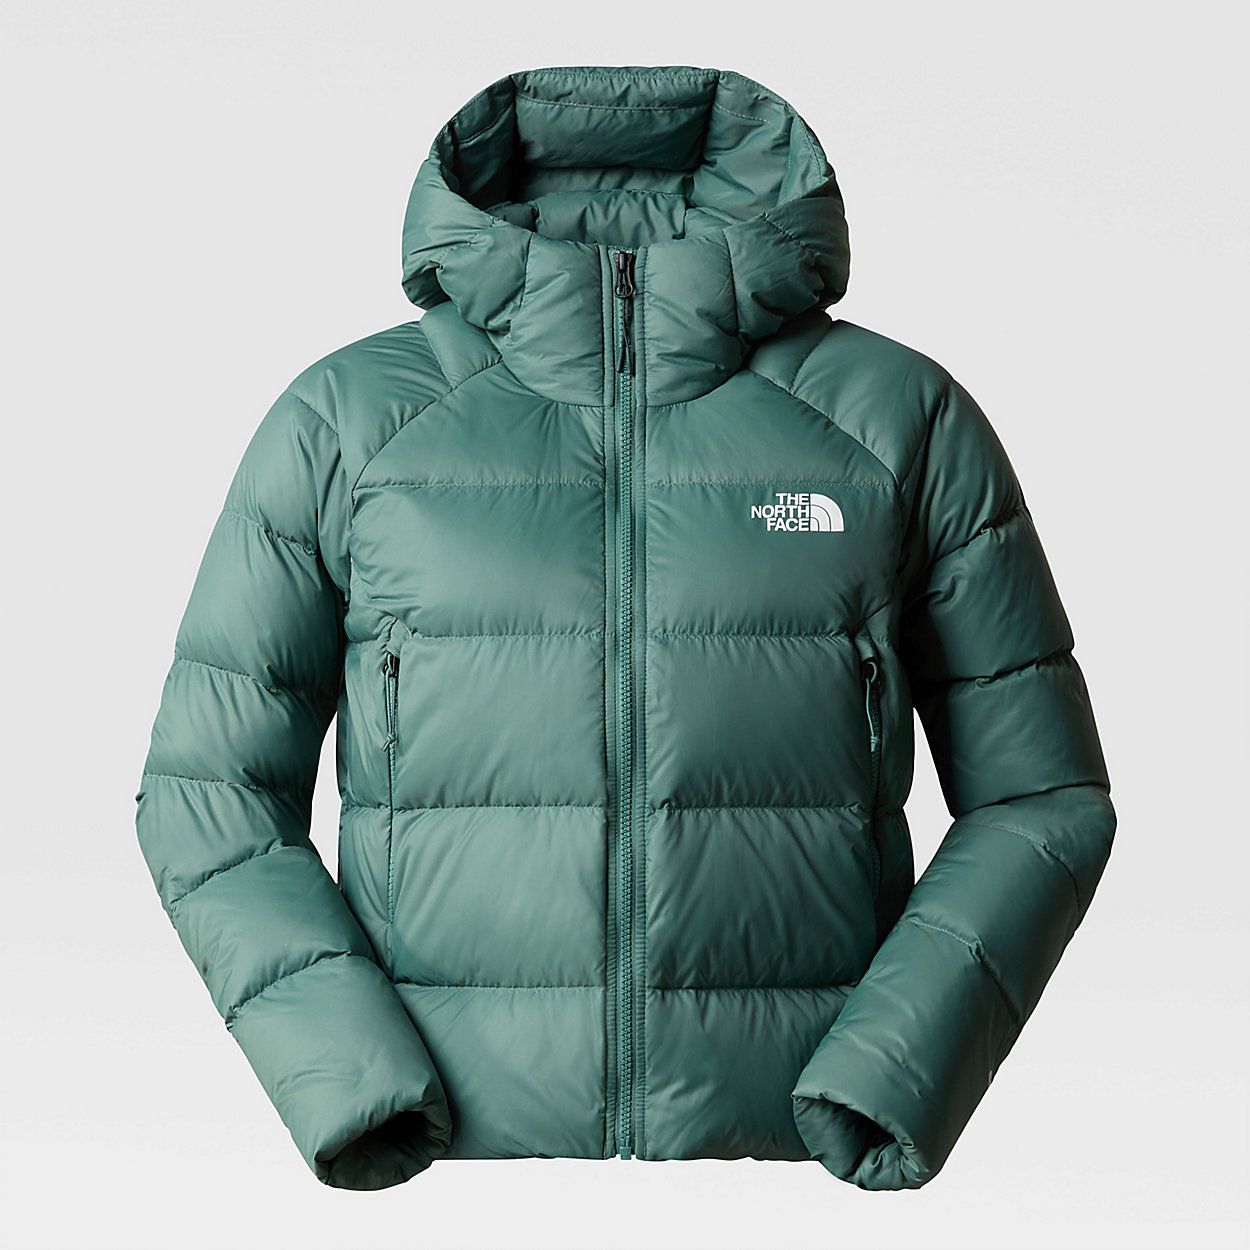 Unlock Wilderness' choice in the Mountain Equipment Vs North Face comparison, the Hyalite Down Hooded Jacket by The North Face